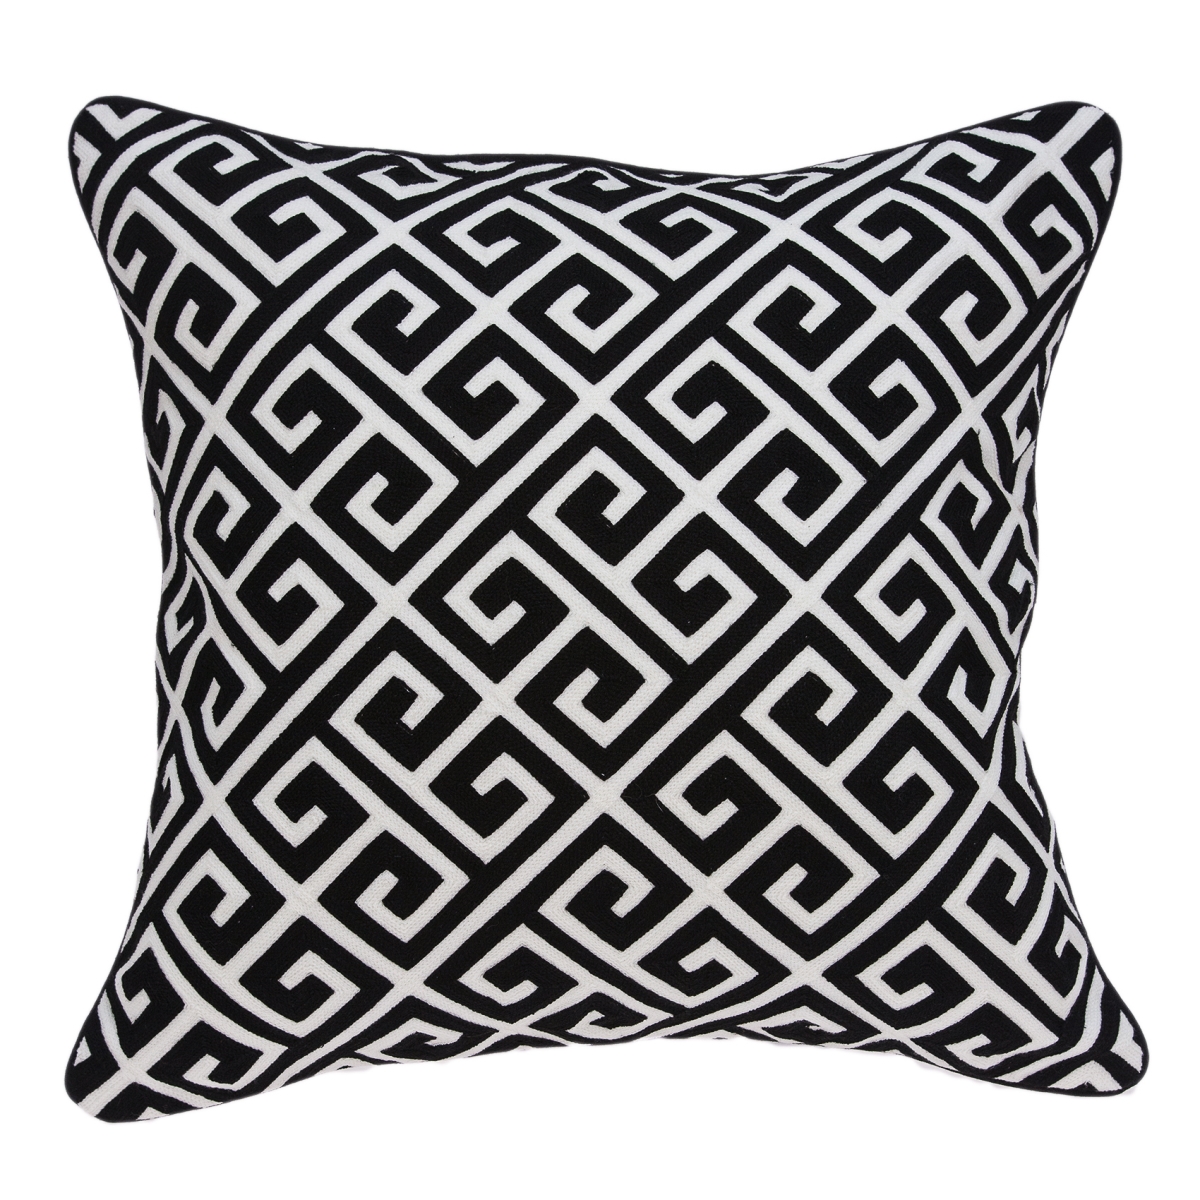 Pila11002c Cameo Black & White Square Transitional Pillow Cover - 20 X 20 X 0.5 In.